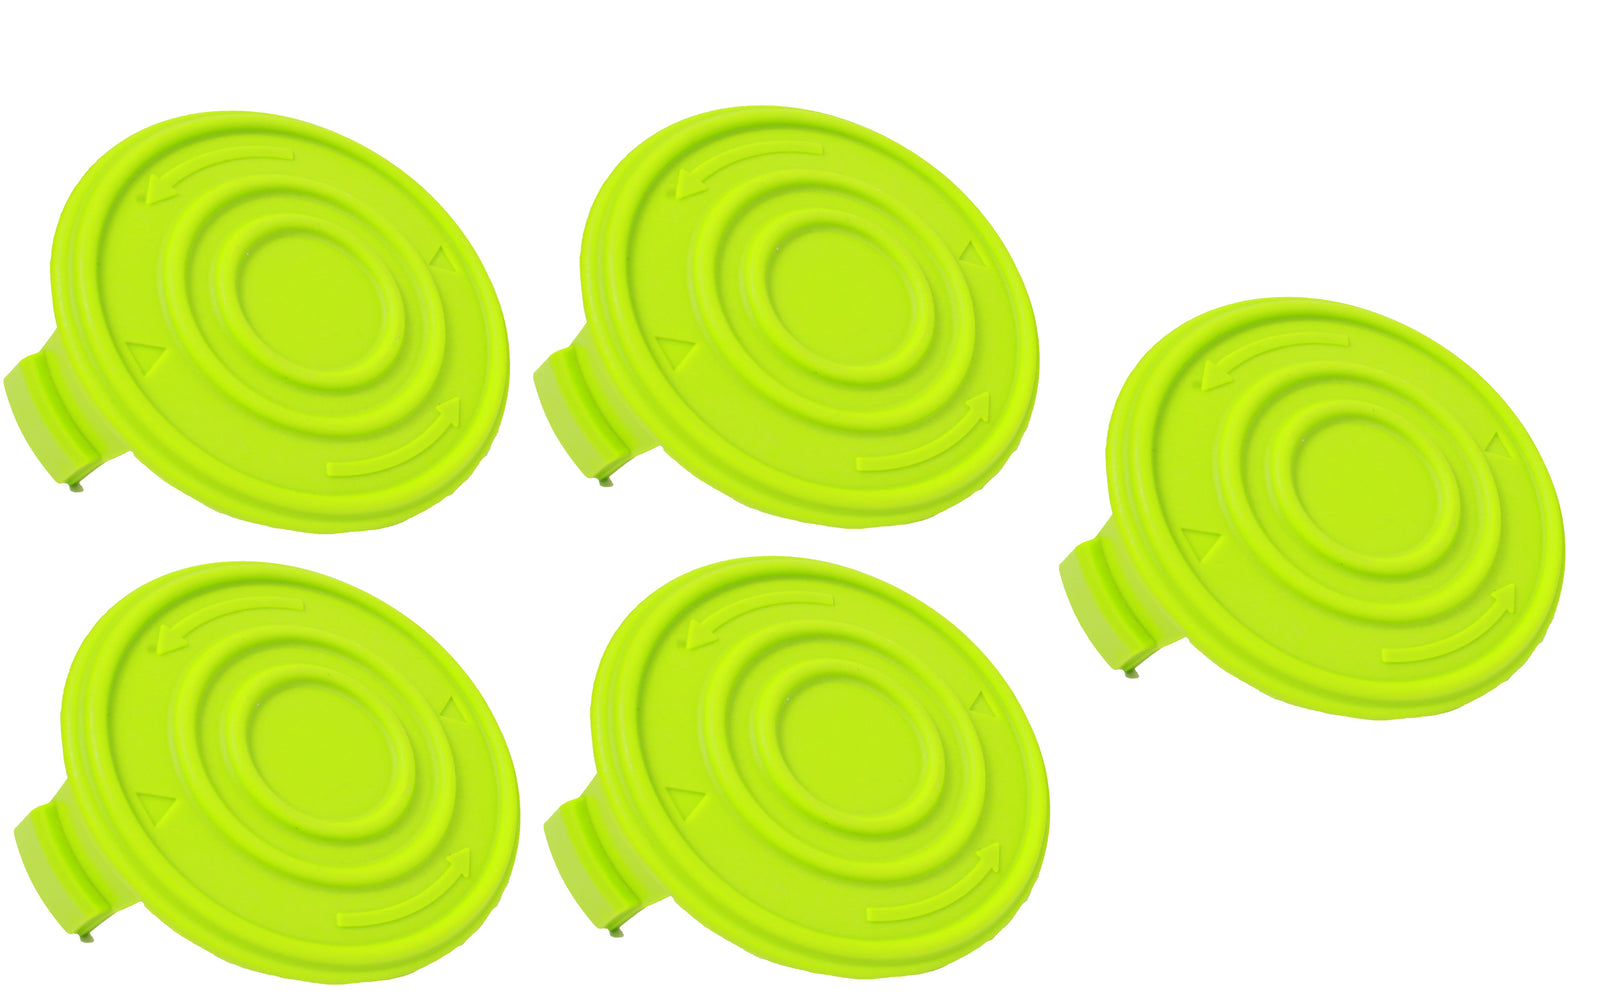 5 Pack of Genuine GreenWorks 34121186-2 String Trimmer Spool Covers